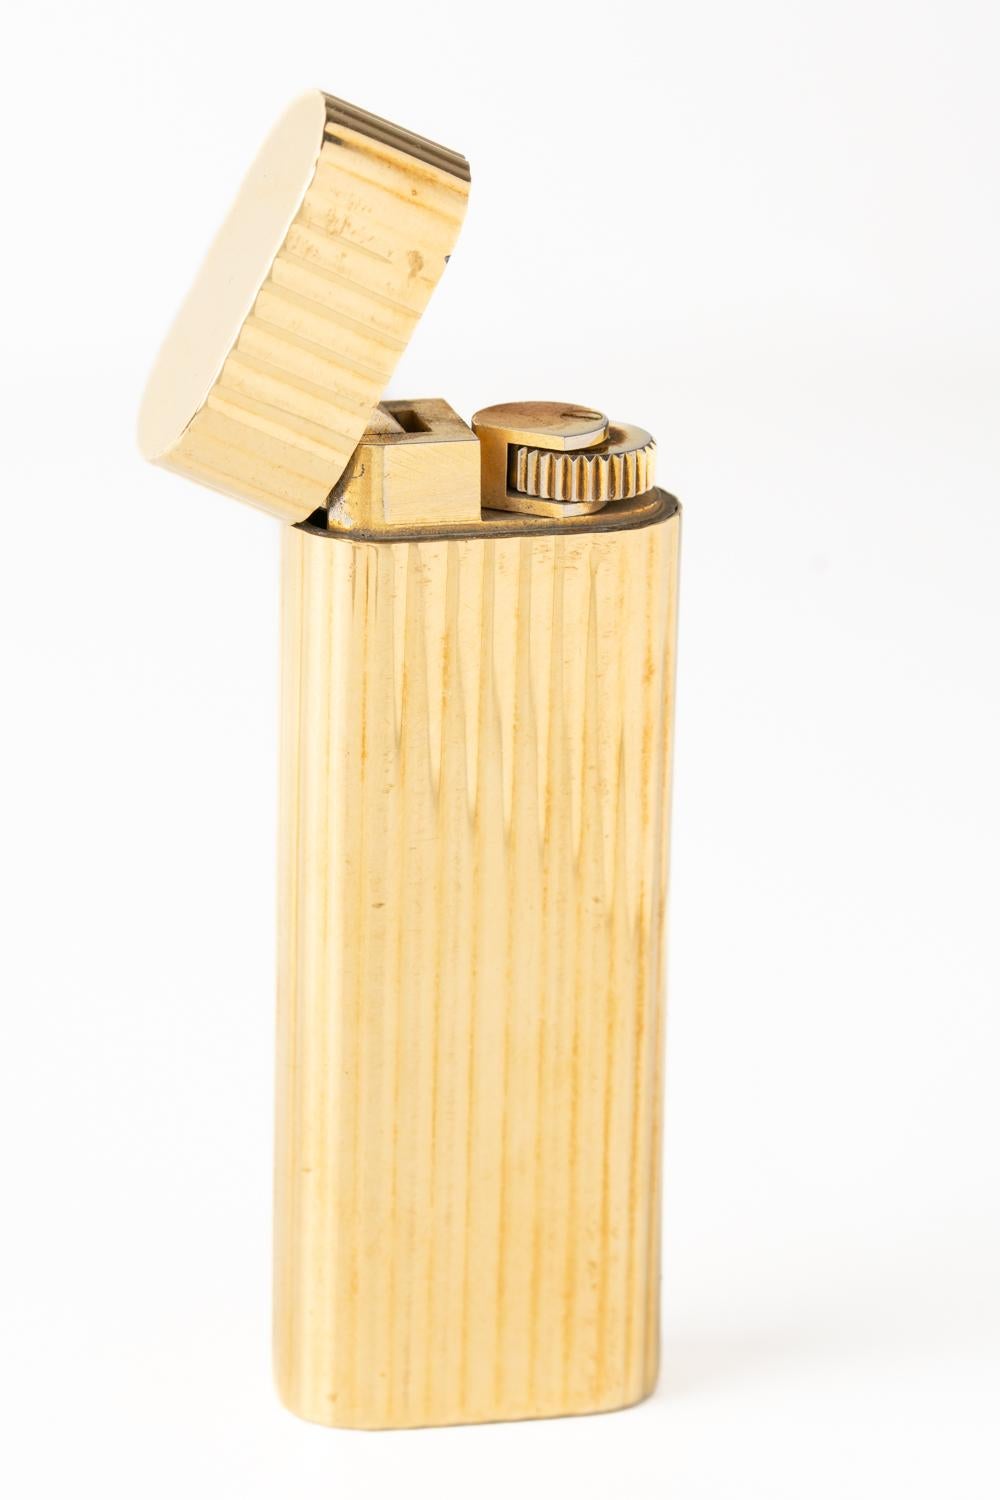  Vintage French Cartier Stripe Gold Plated Lighter  Unisexe 